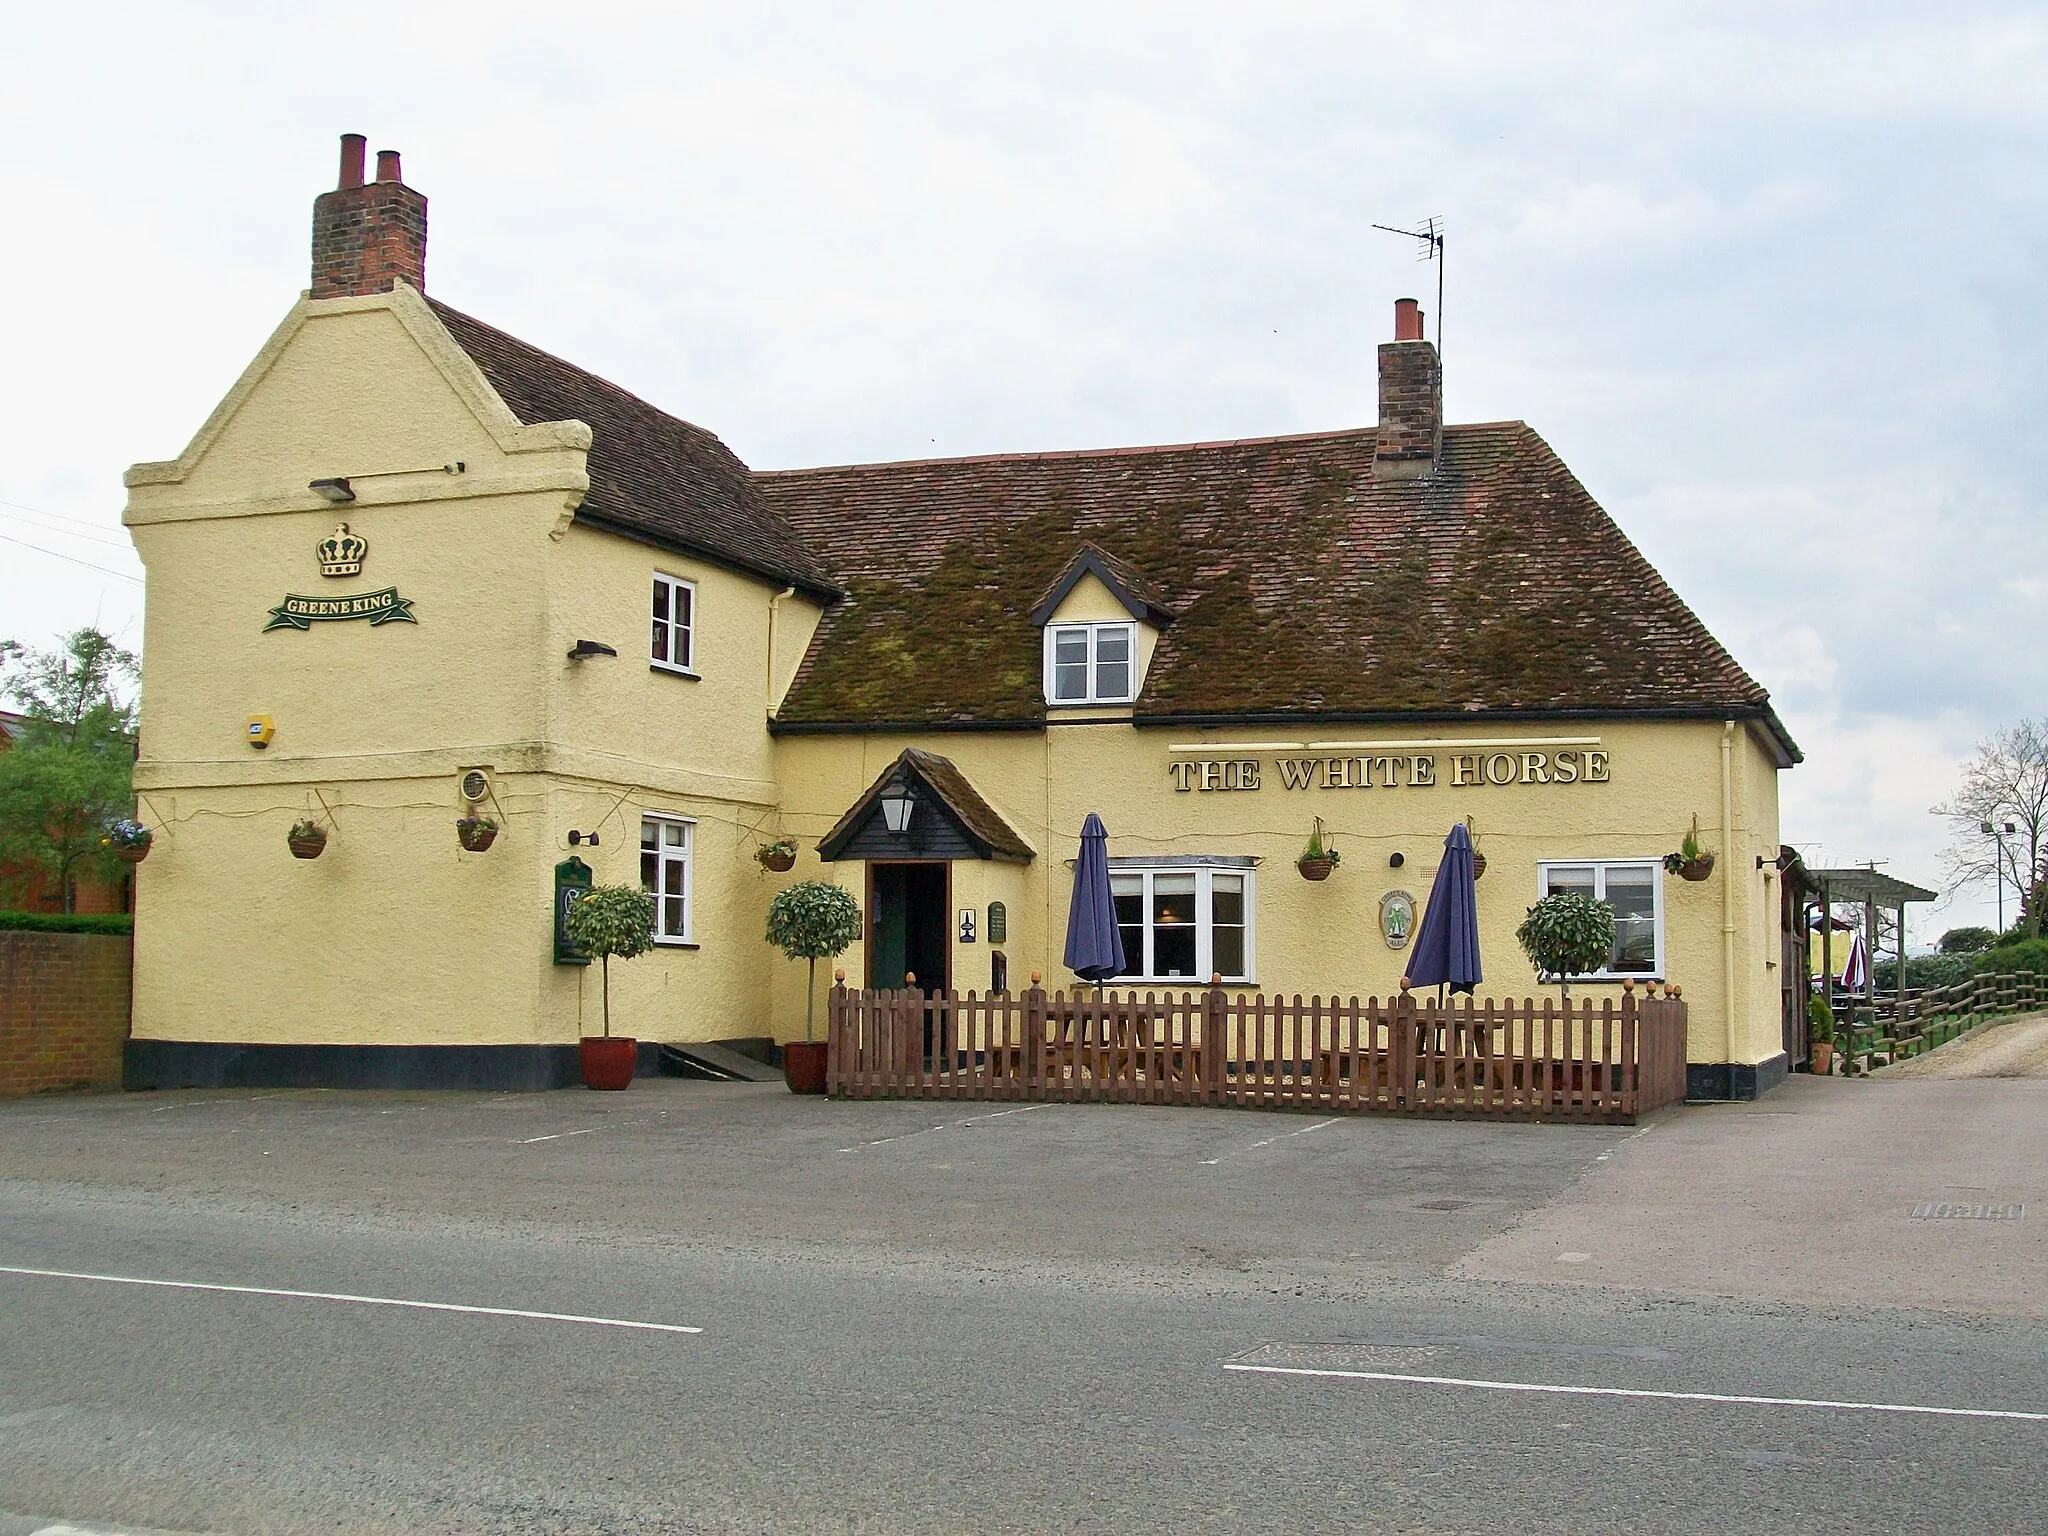 Photo showing: The White Horse pub in Broom, Bedfordshire.